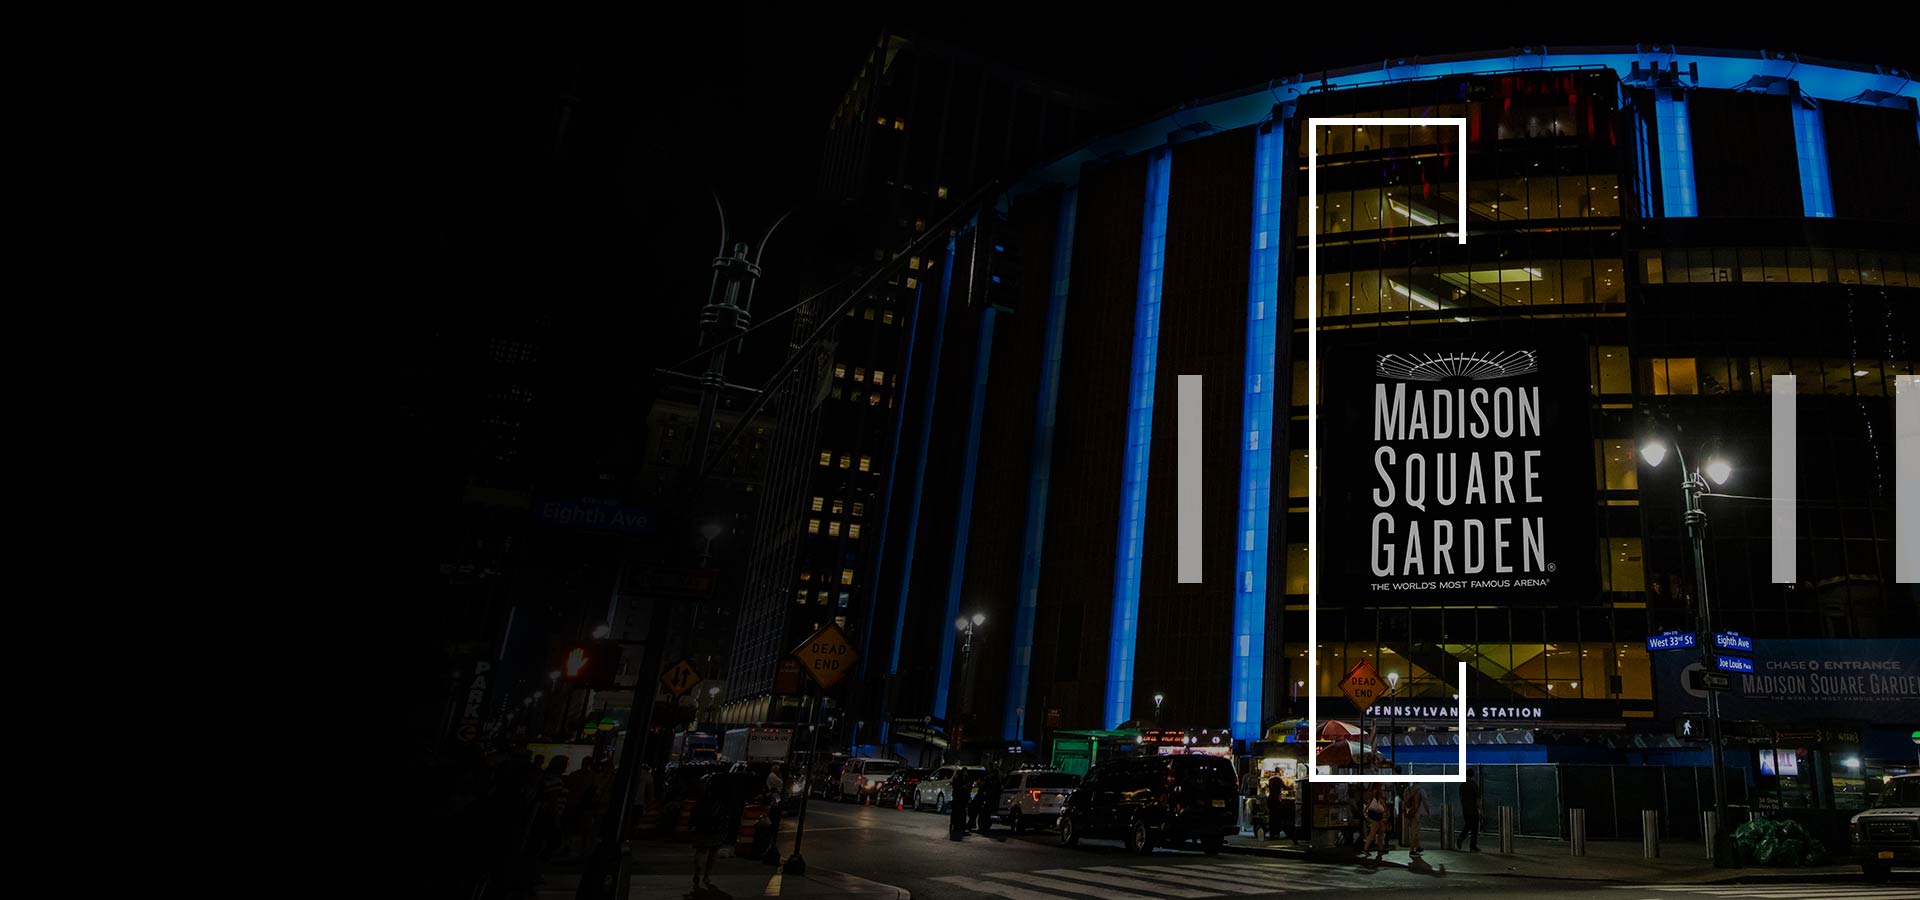 Read More about New Digital Dimensions in MSG Sports and Entertainment